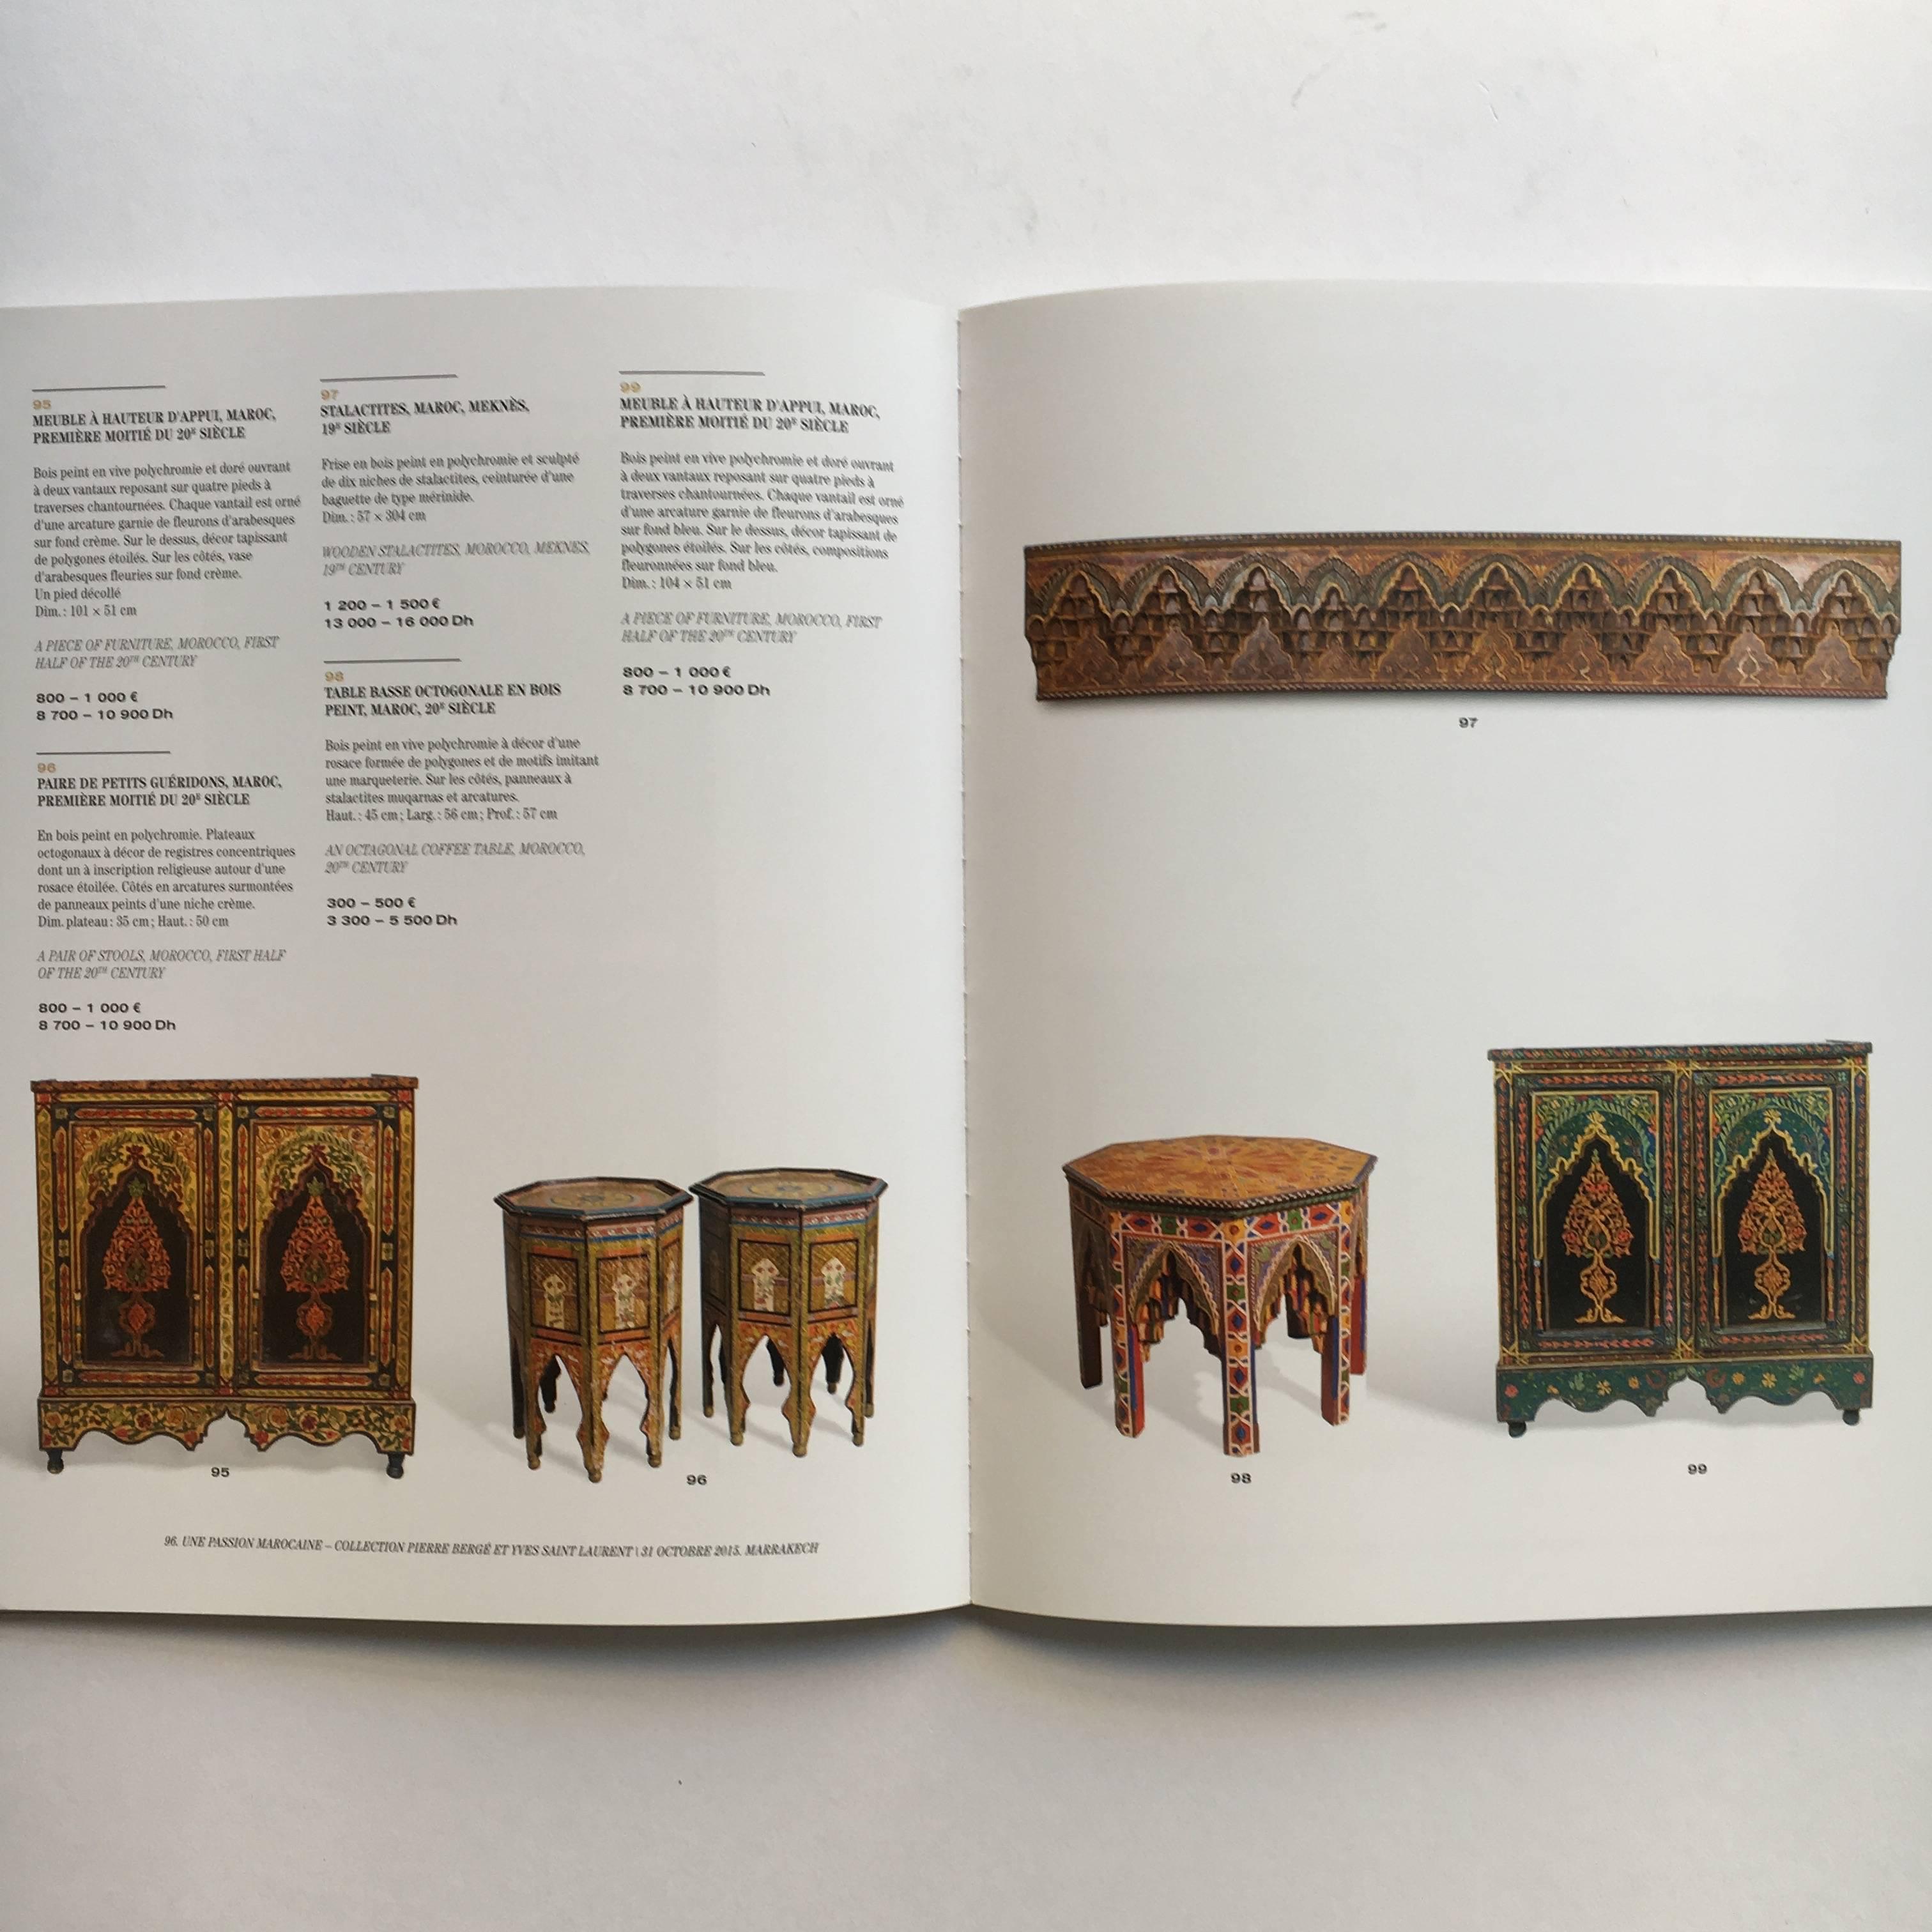 Published by Artcurial, 2015

Published on the occasion of the Artcurial auction of Yves-Saint Laurent and Pierre Bergé's personal collection, entitled 'Yves Saint Laurent et le Maroc'. 

Consisting of nearly 180 objects of Moroccan art,